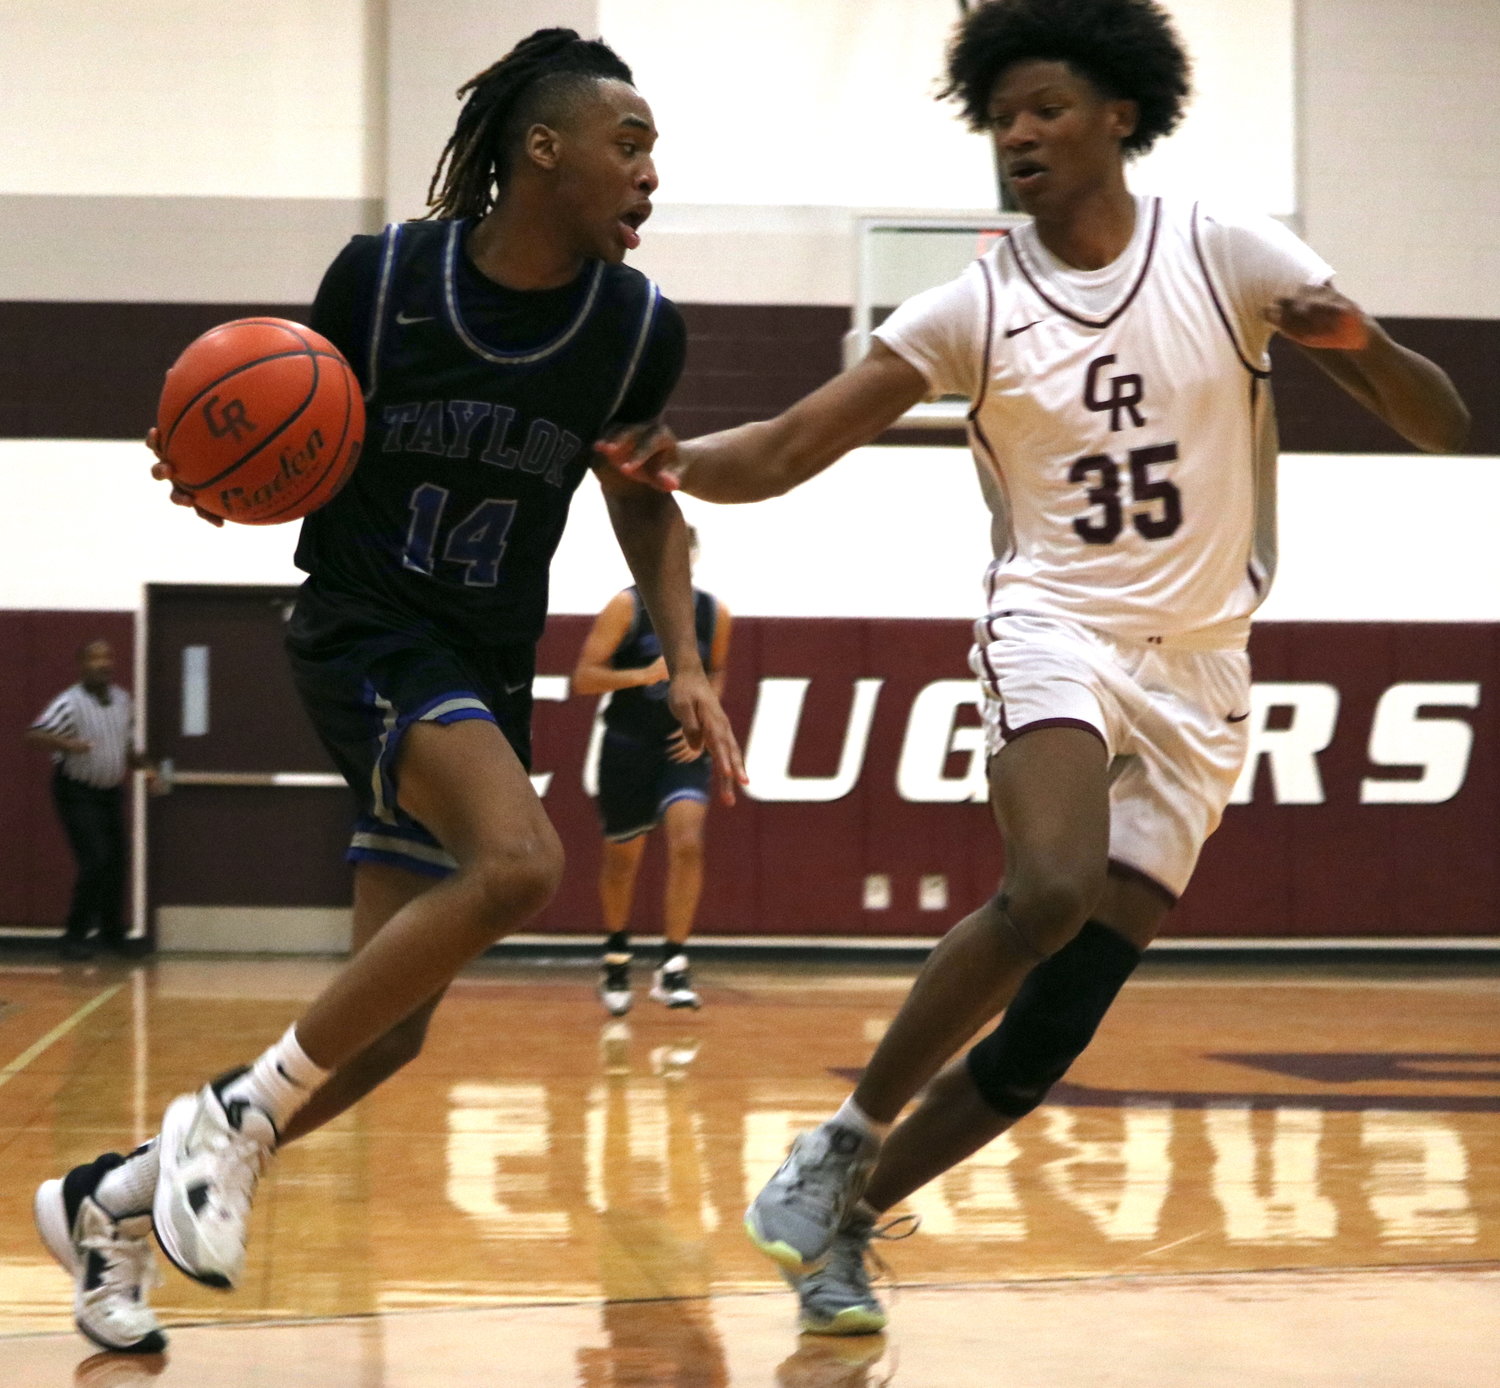 Jabari Parker drives towards the basket during Wednesday's game between Cinco Ranch and Taylor at the Cinco Ranch gym.